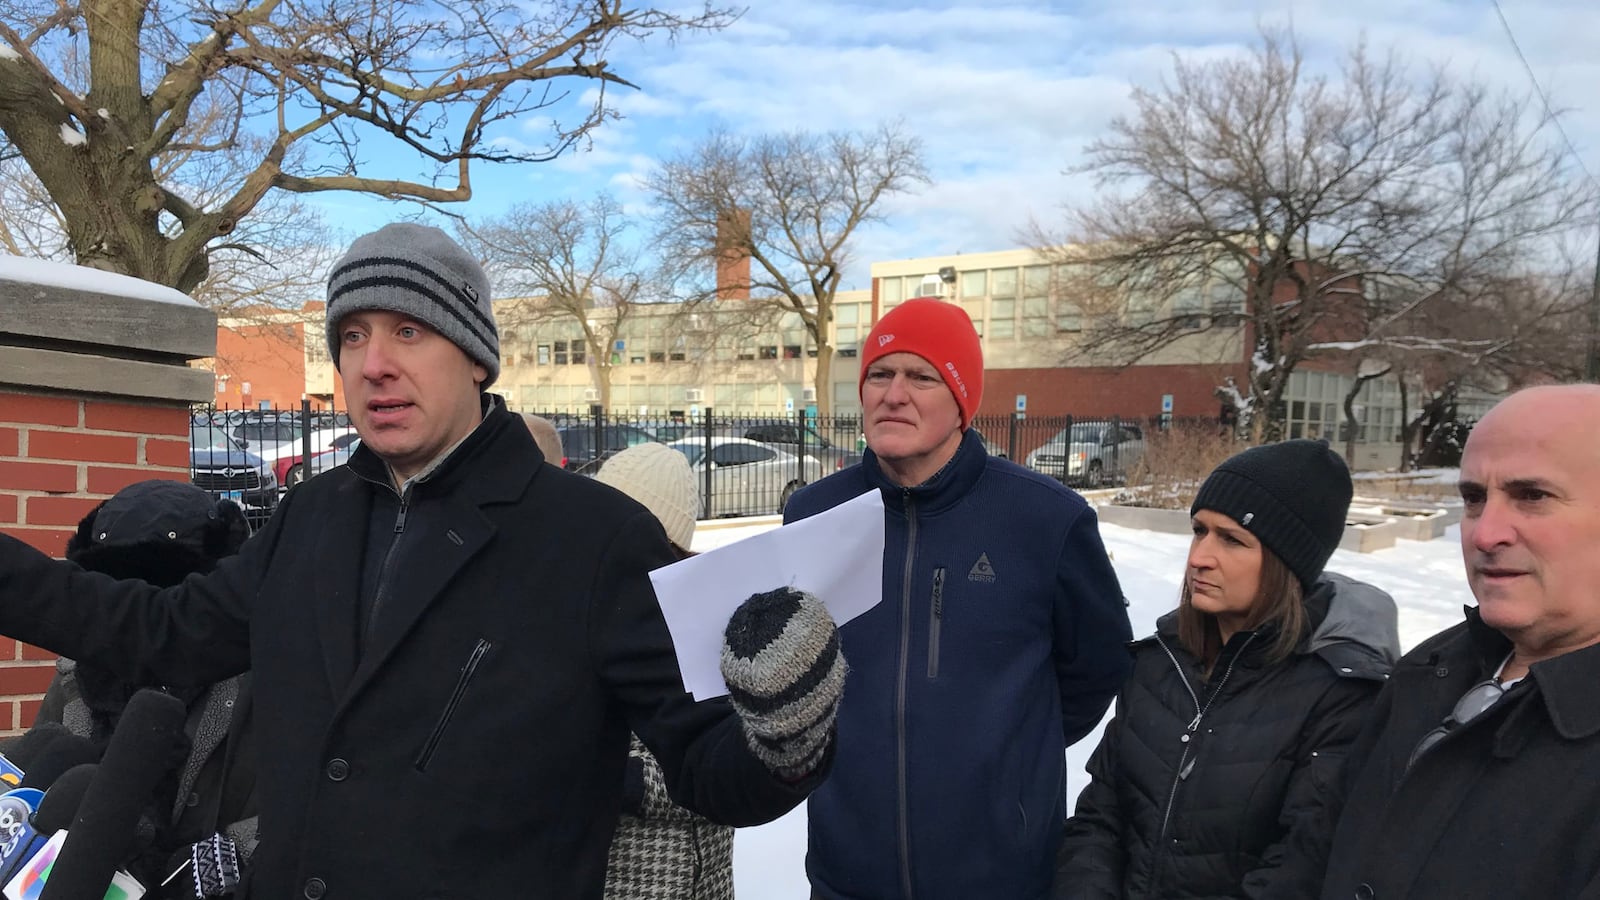 Local School Council member Eli Grant speaks at a press conference on Feb. 7, 2020 outside Lincoln Park High School.